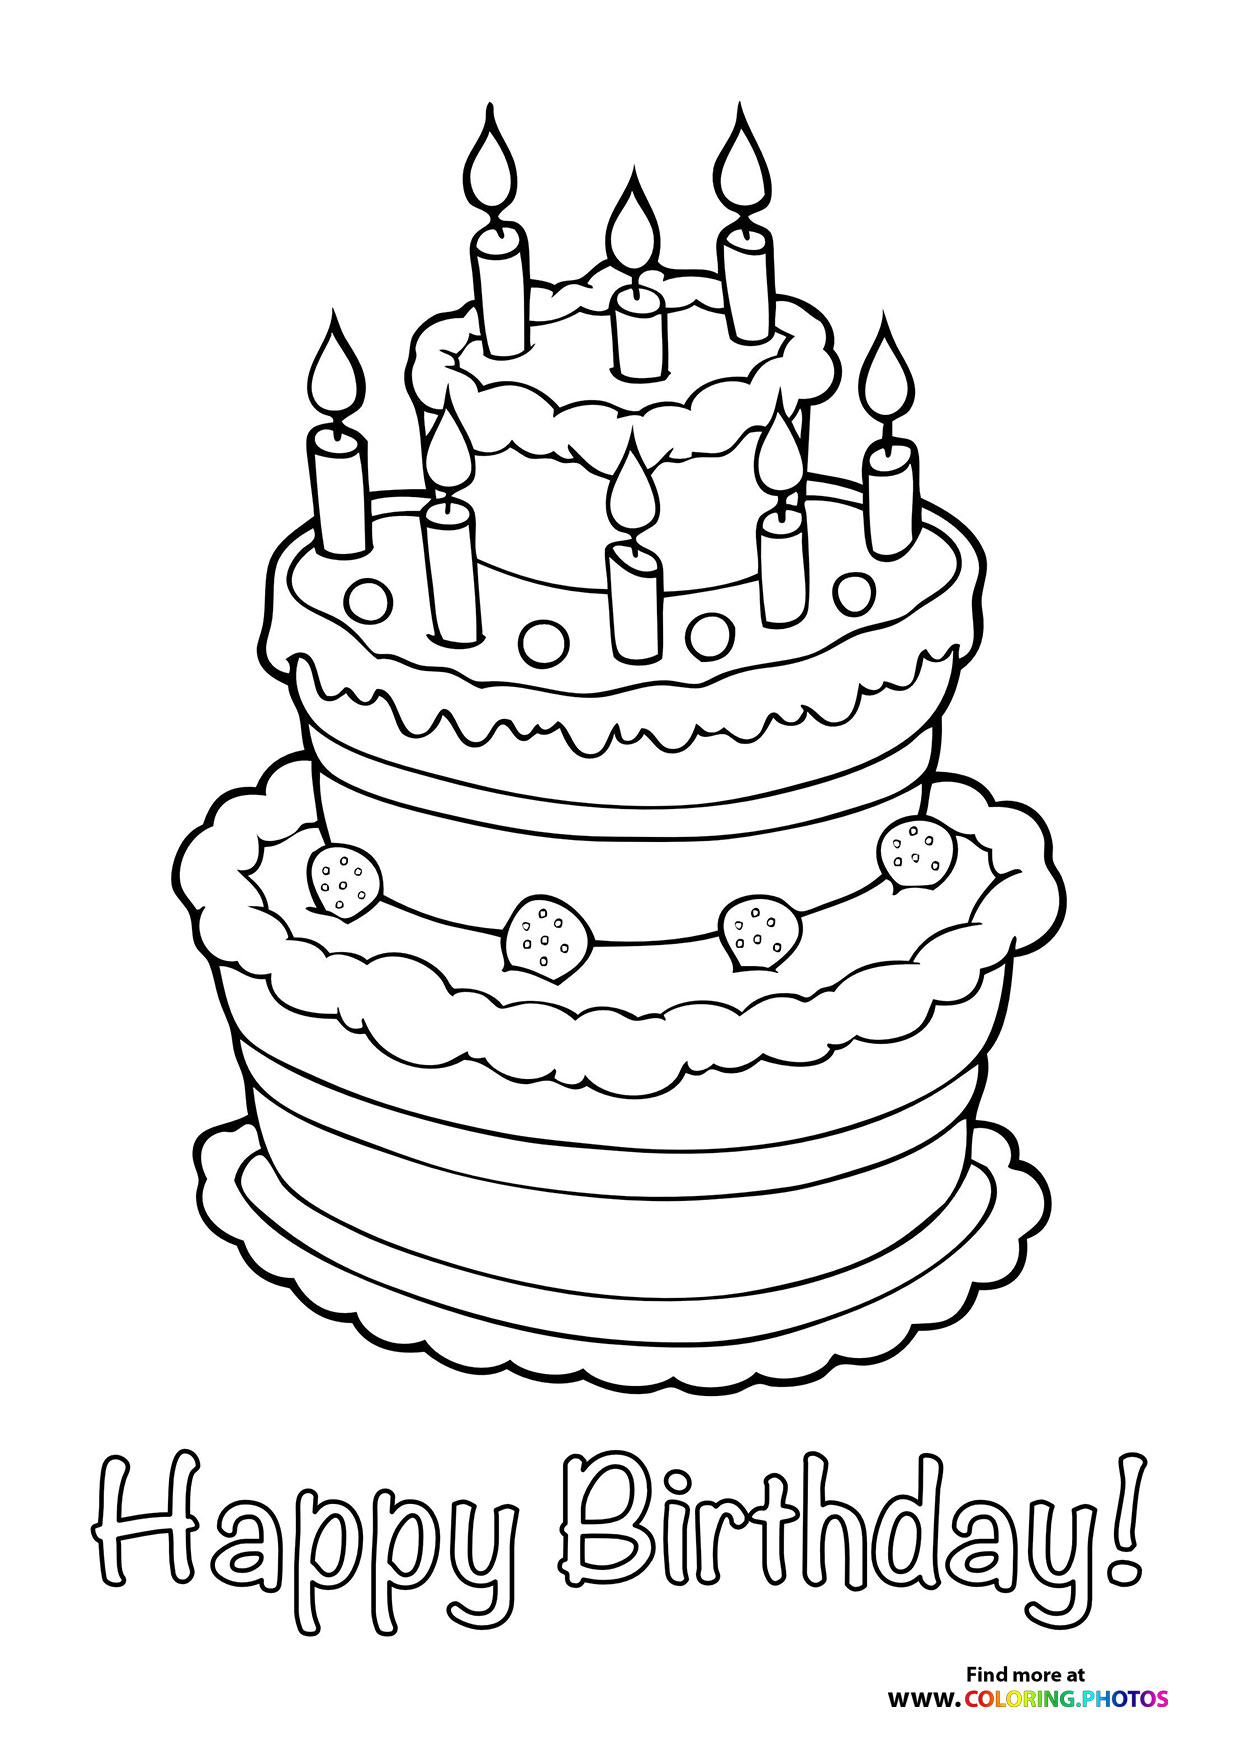 Cake for birthday coloring page